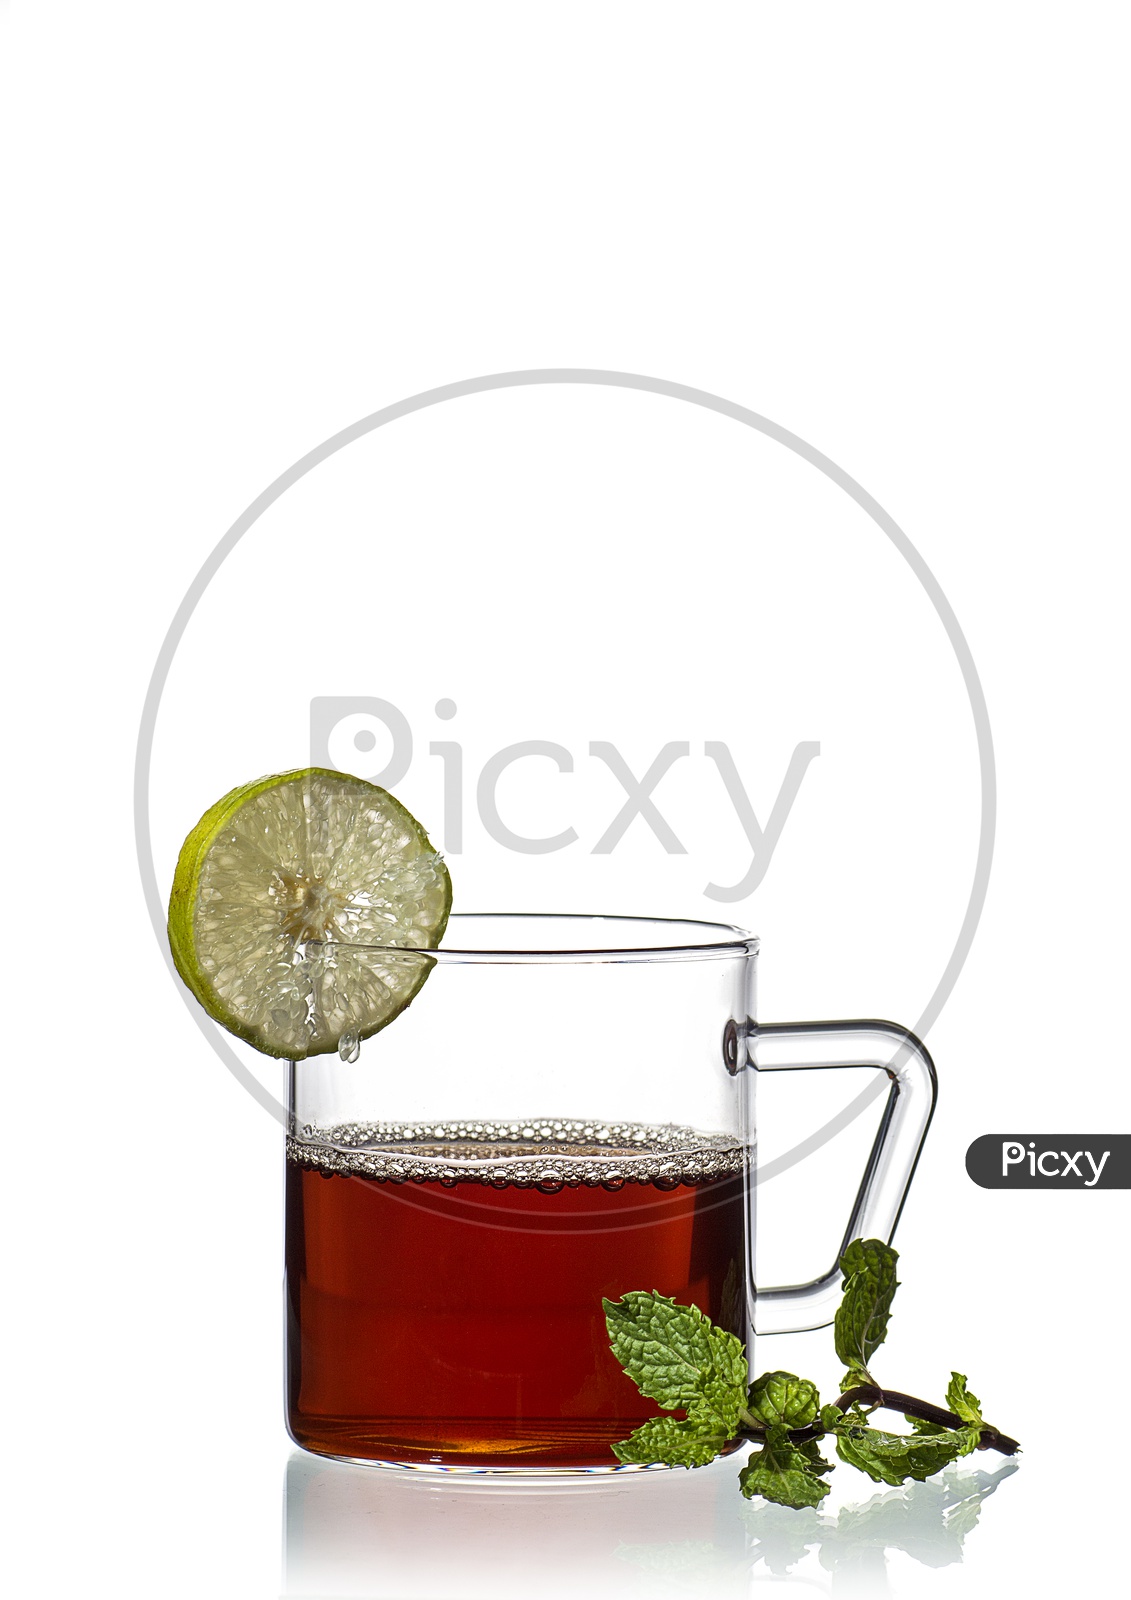 Cup of tea, mint and lemon on white background